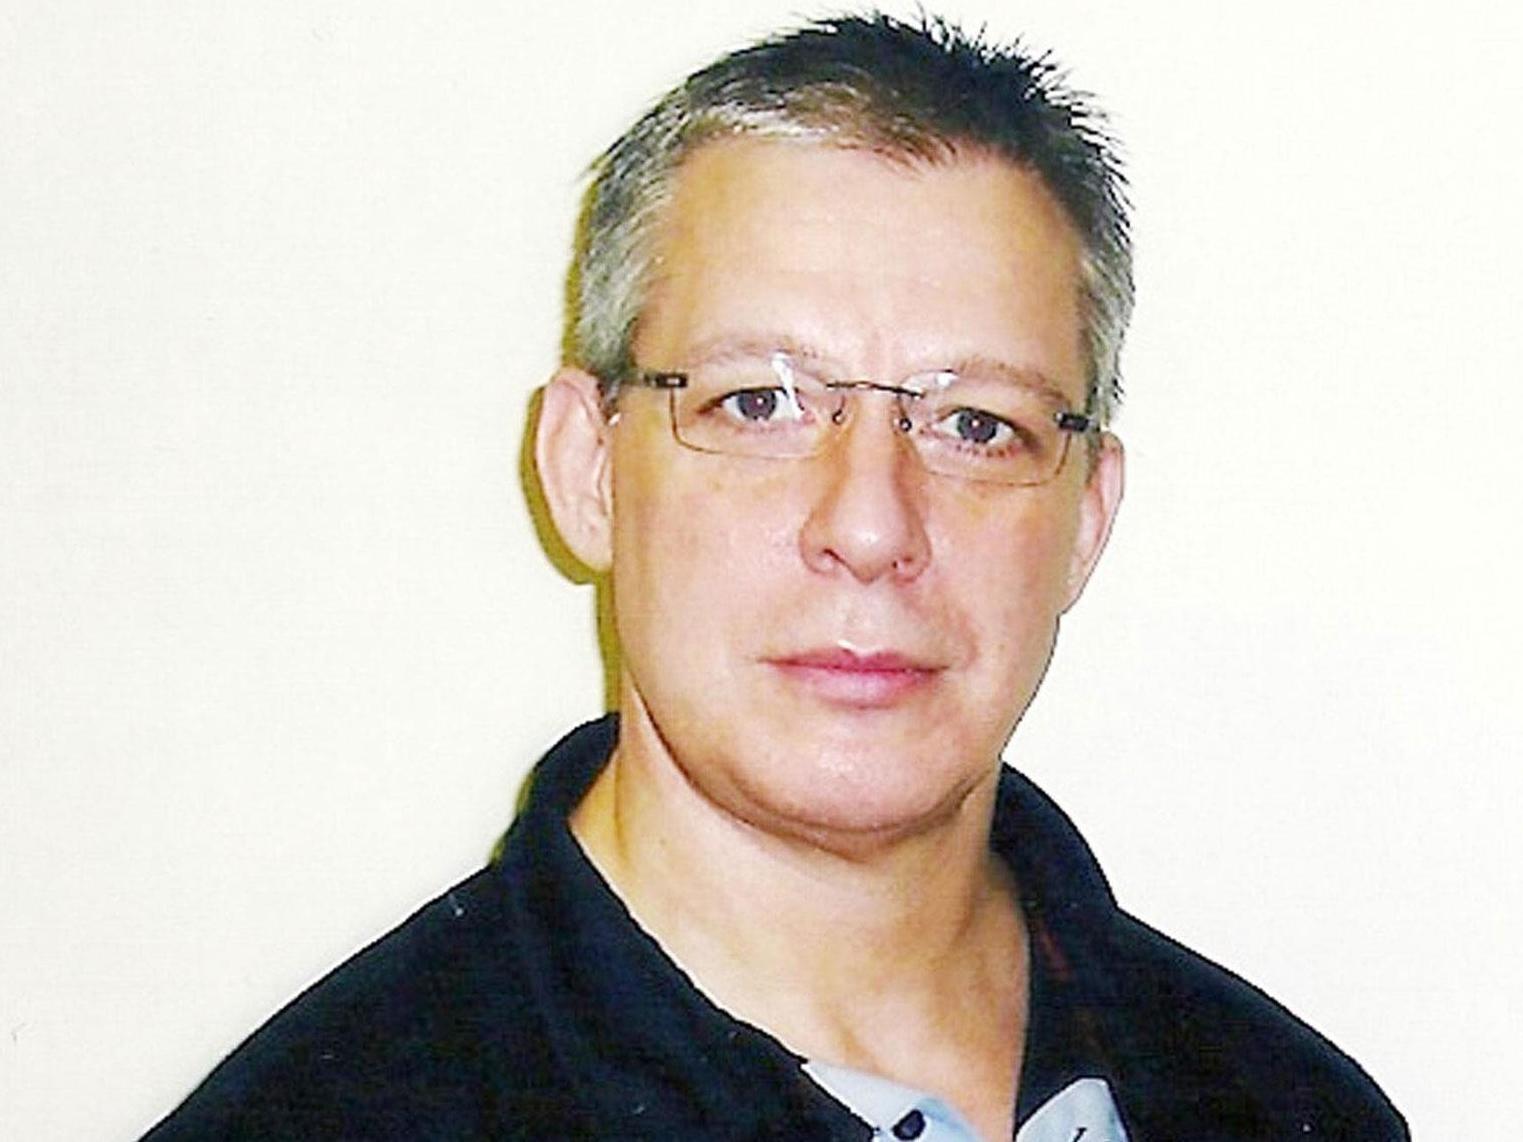 Jeremy Bamber is serving a whole-life sentence for murdering five members of his family in 1985